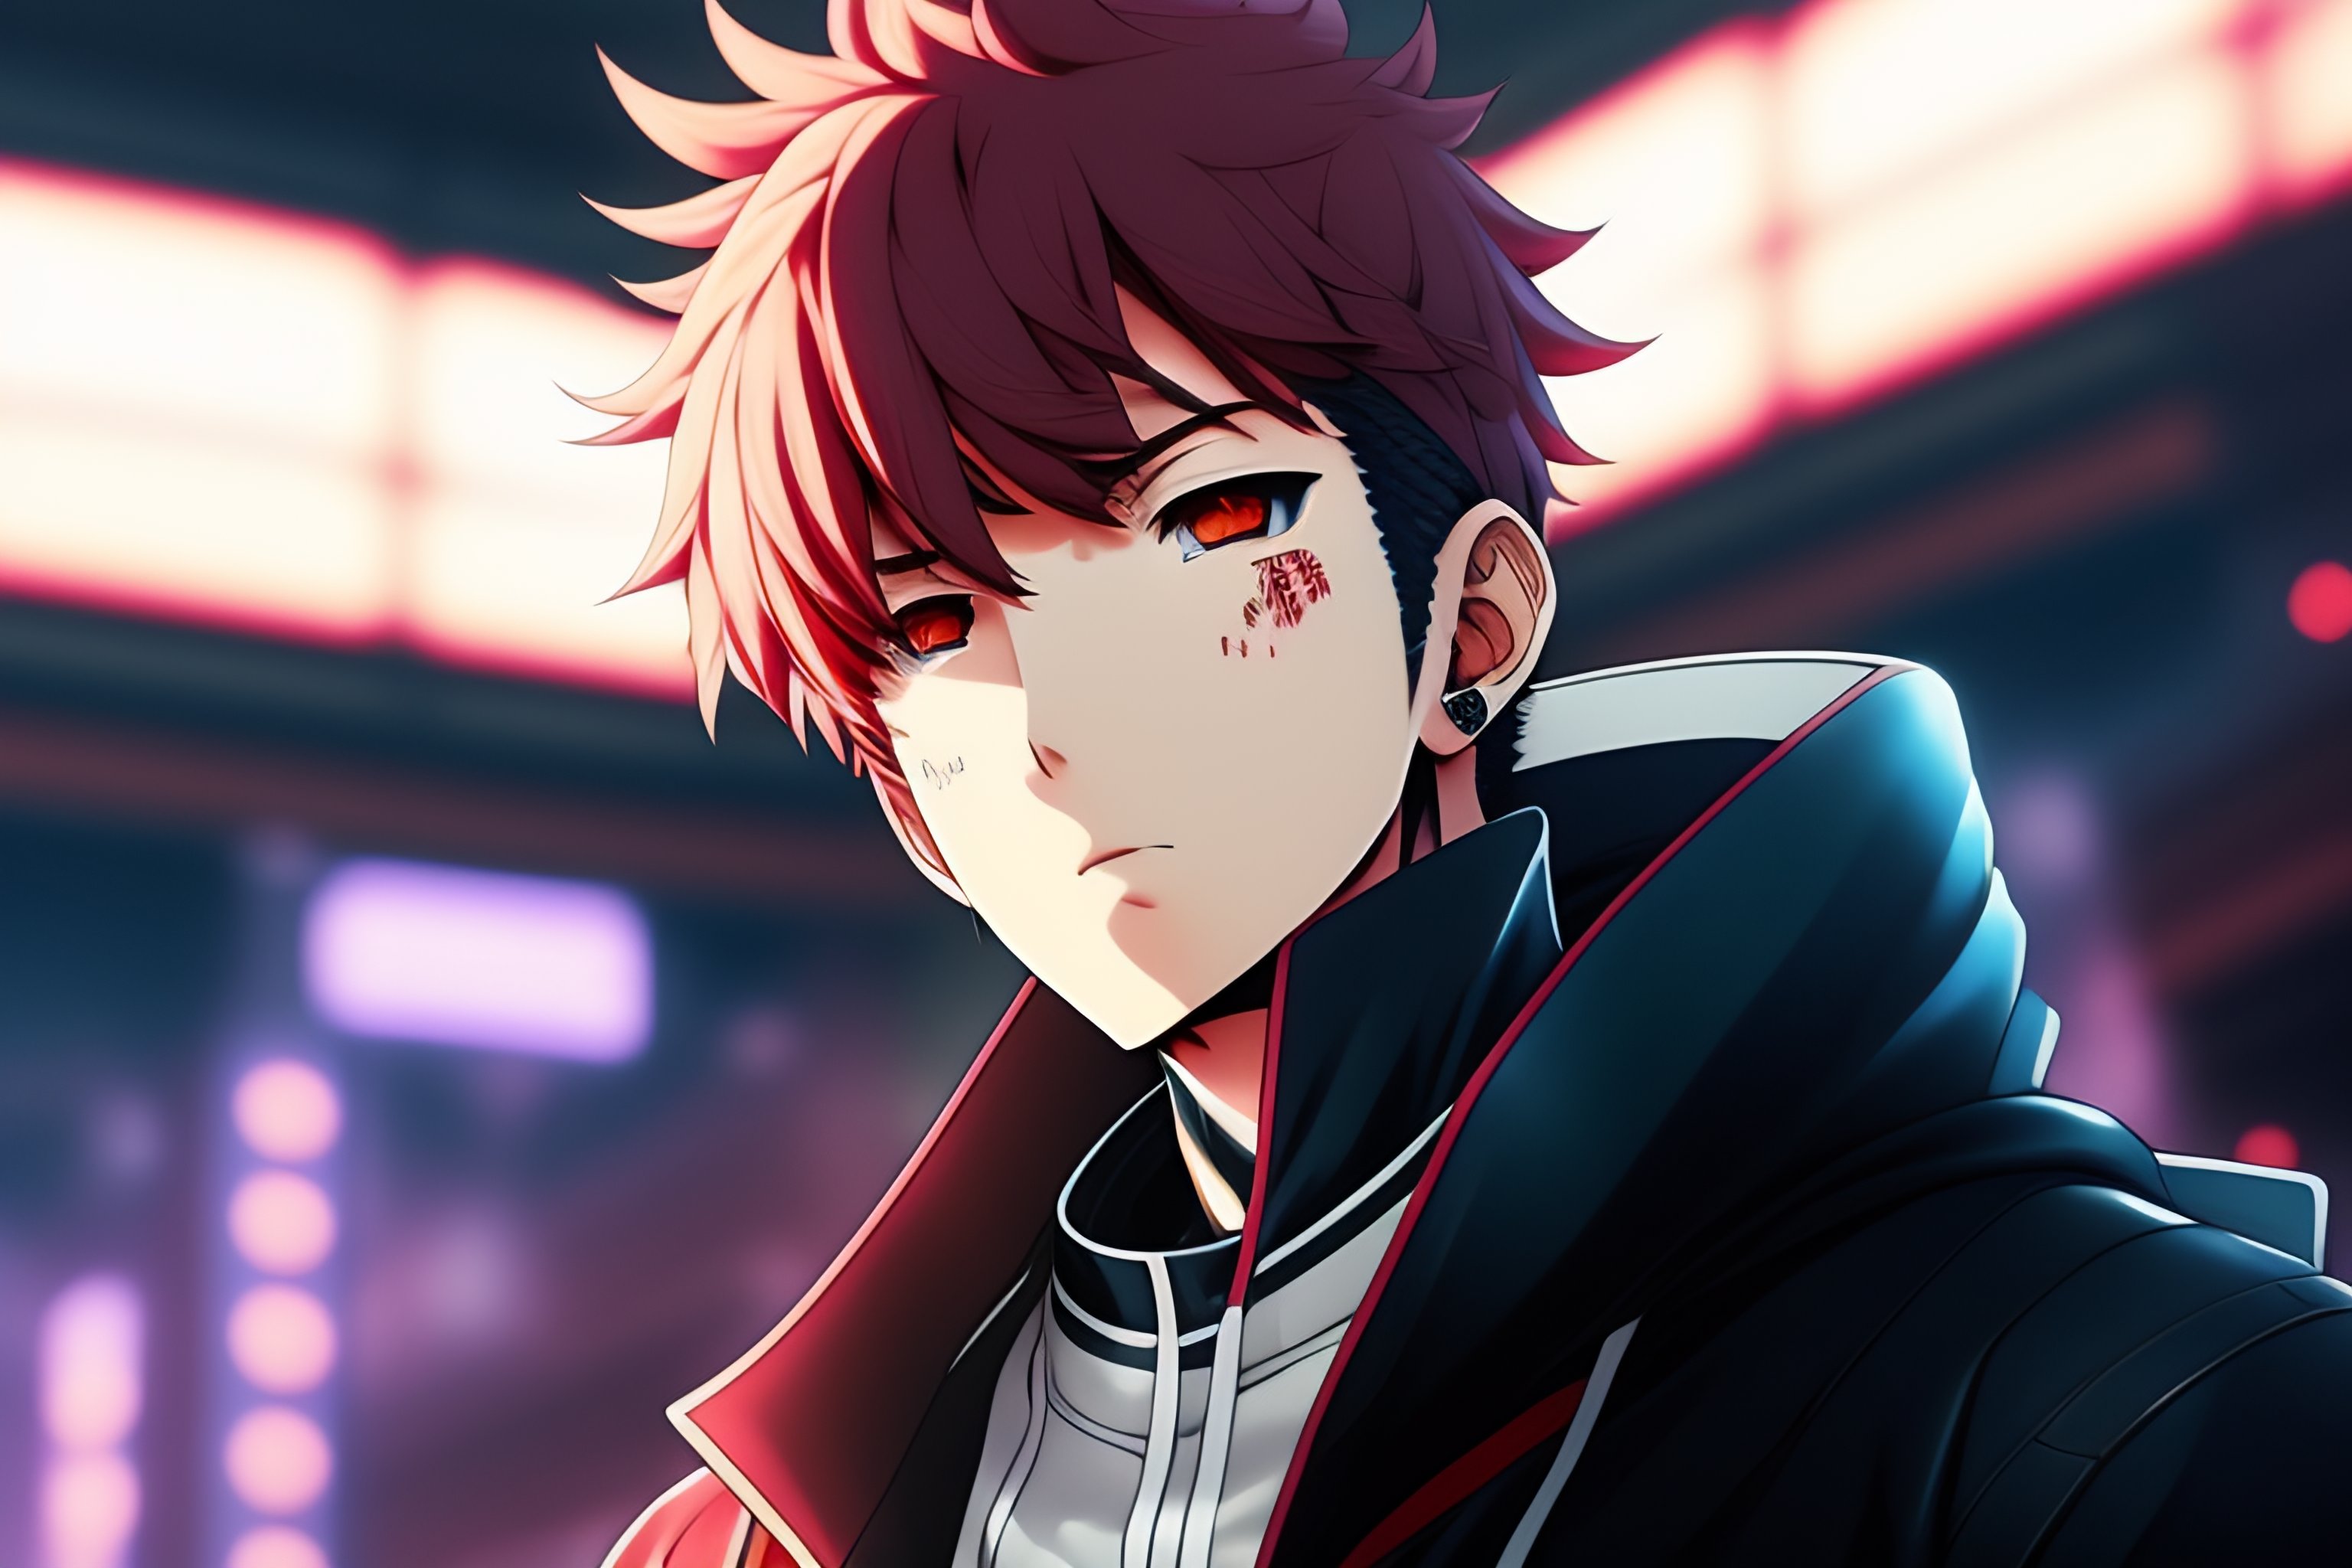 Cool Anime Boy Red Hair 2.0's Code & Price - RblxTrade